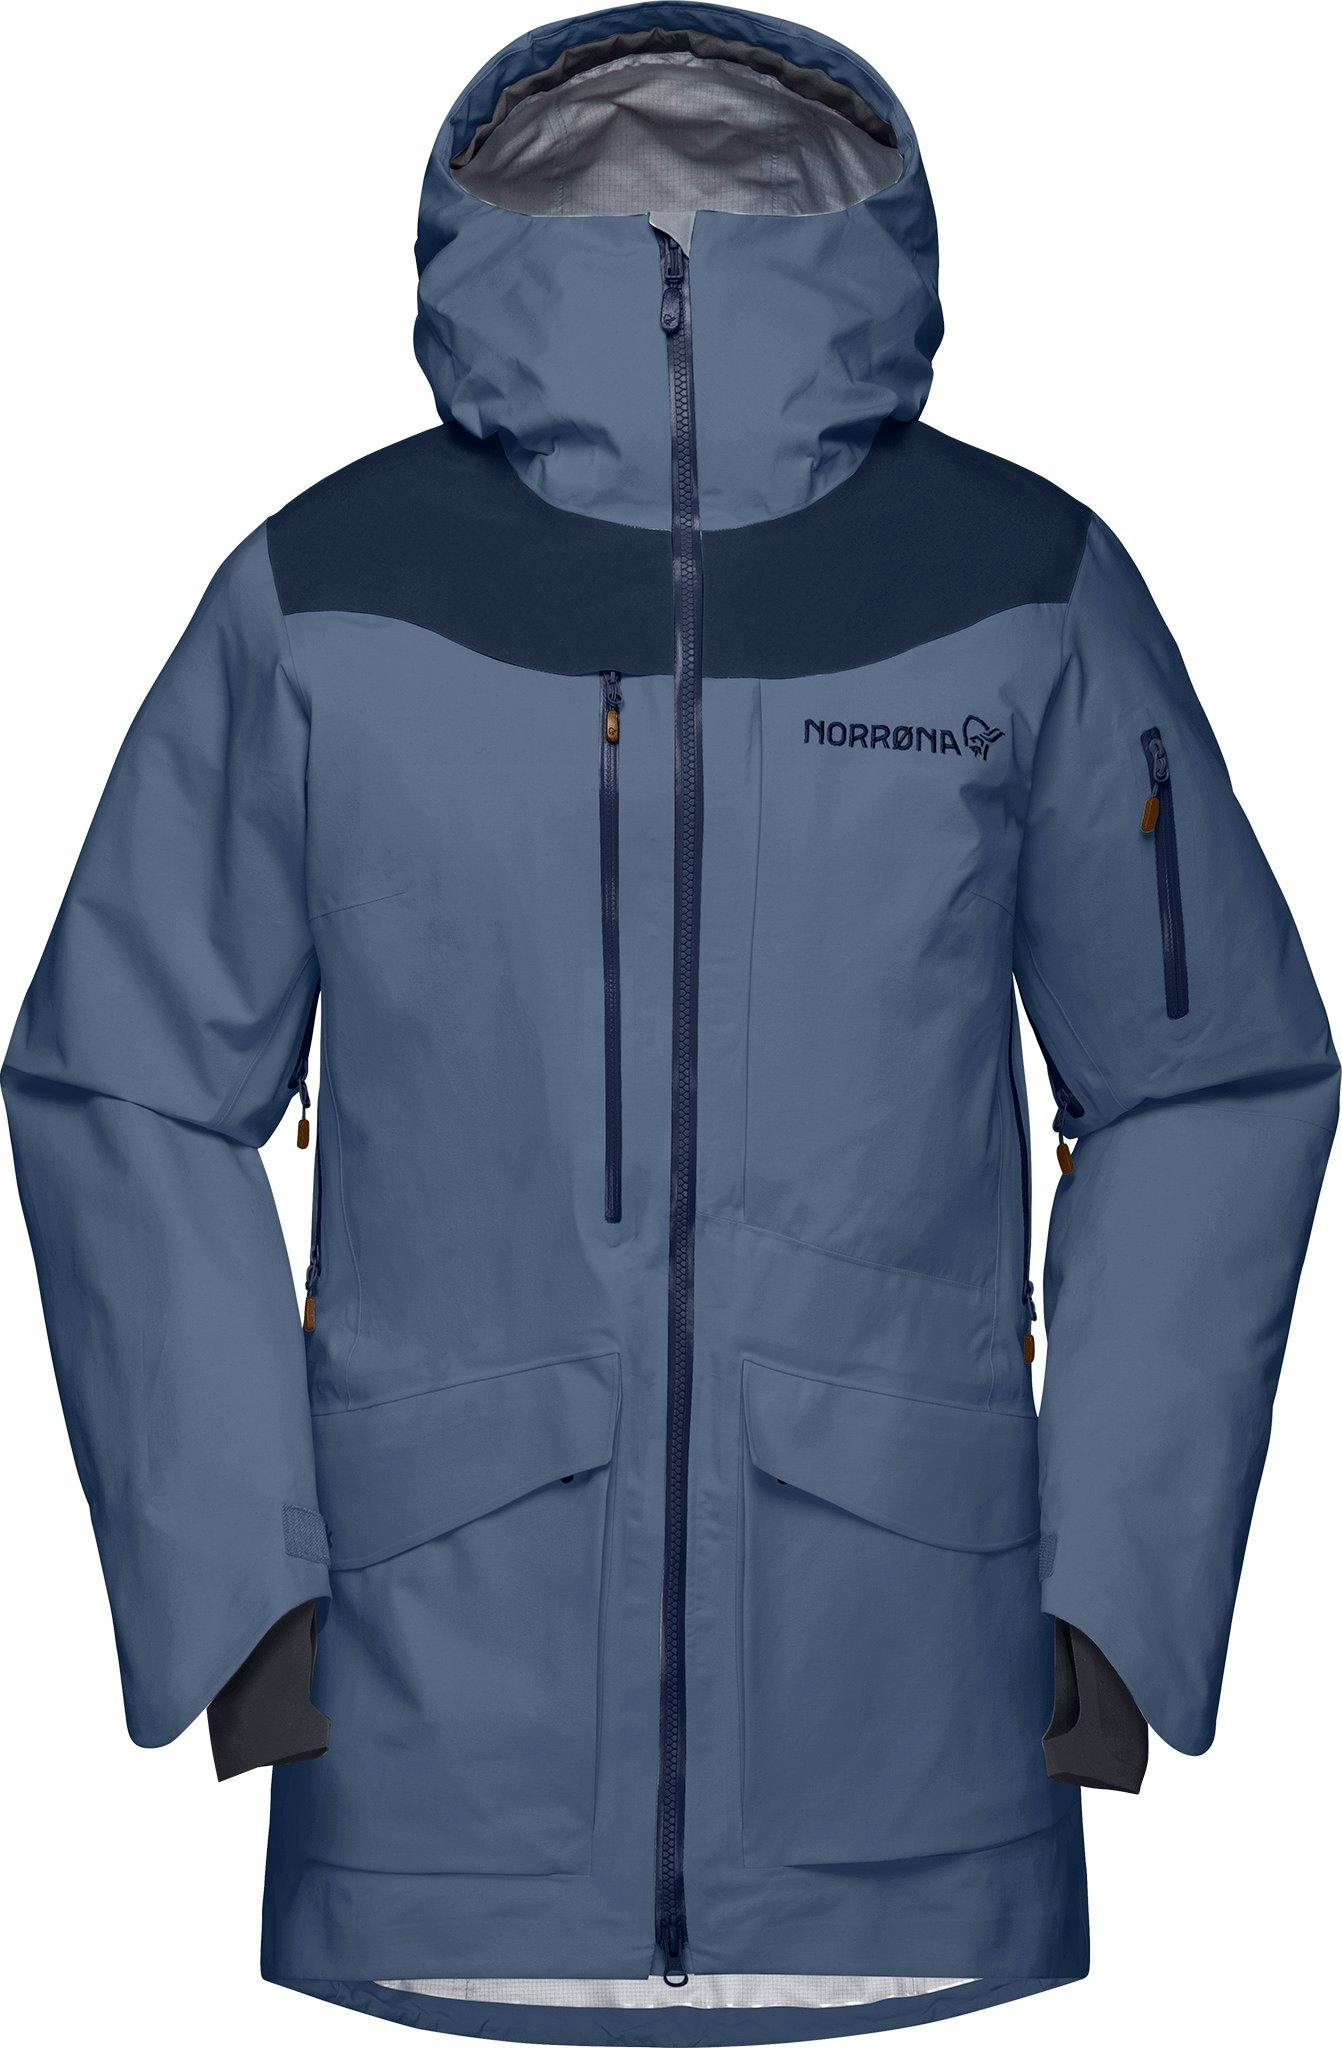 Product image for Tamok Gore-Tex Performance Shell Jacket - Women's